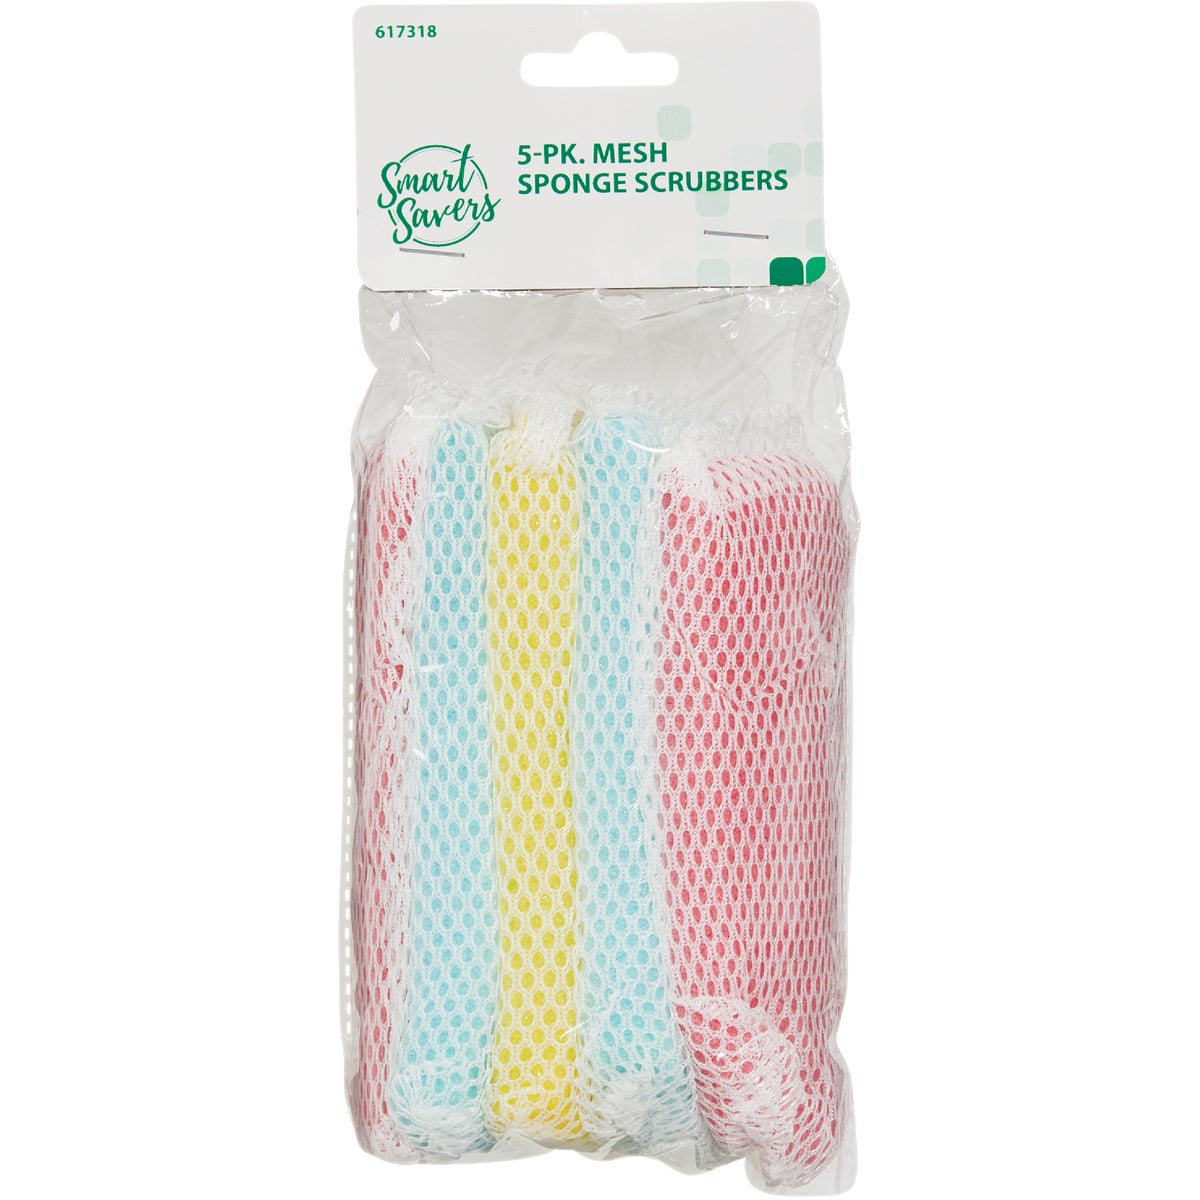 Item 617318, Smart Savers 5-piece sponge scrubbers with mesh cover.